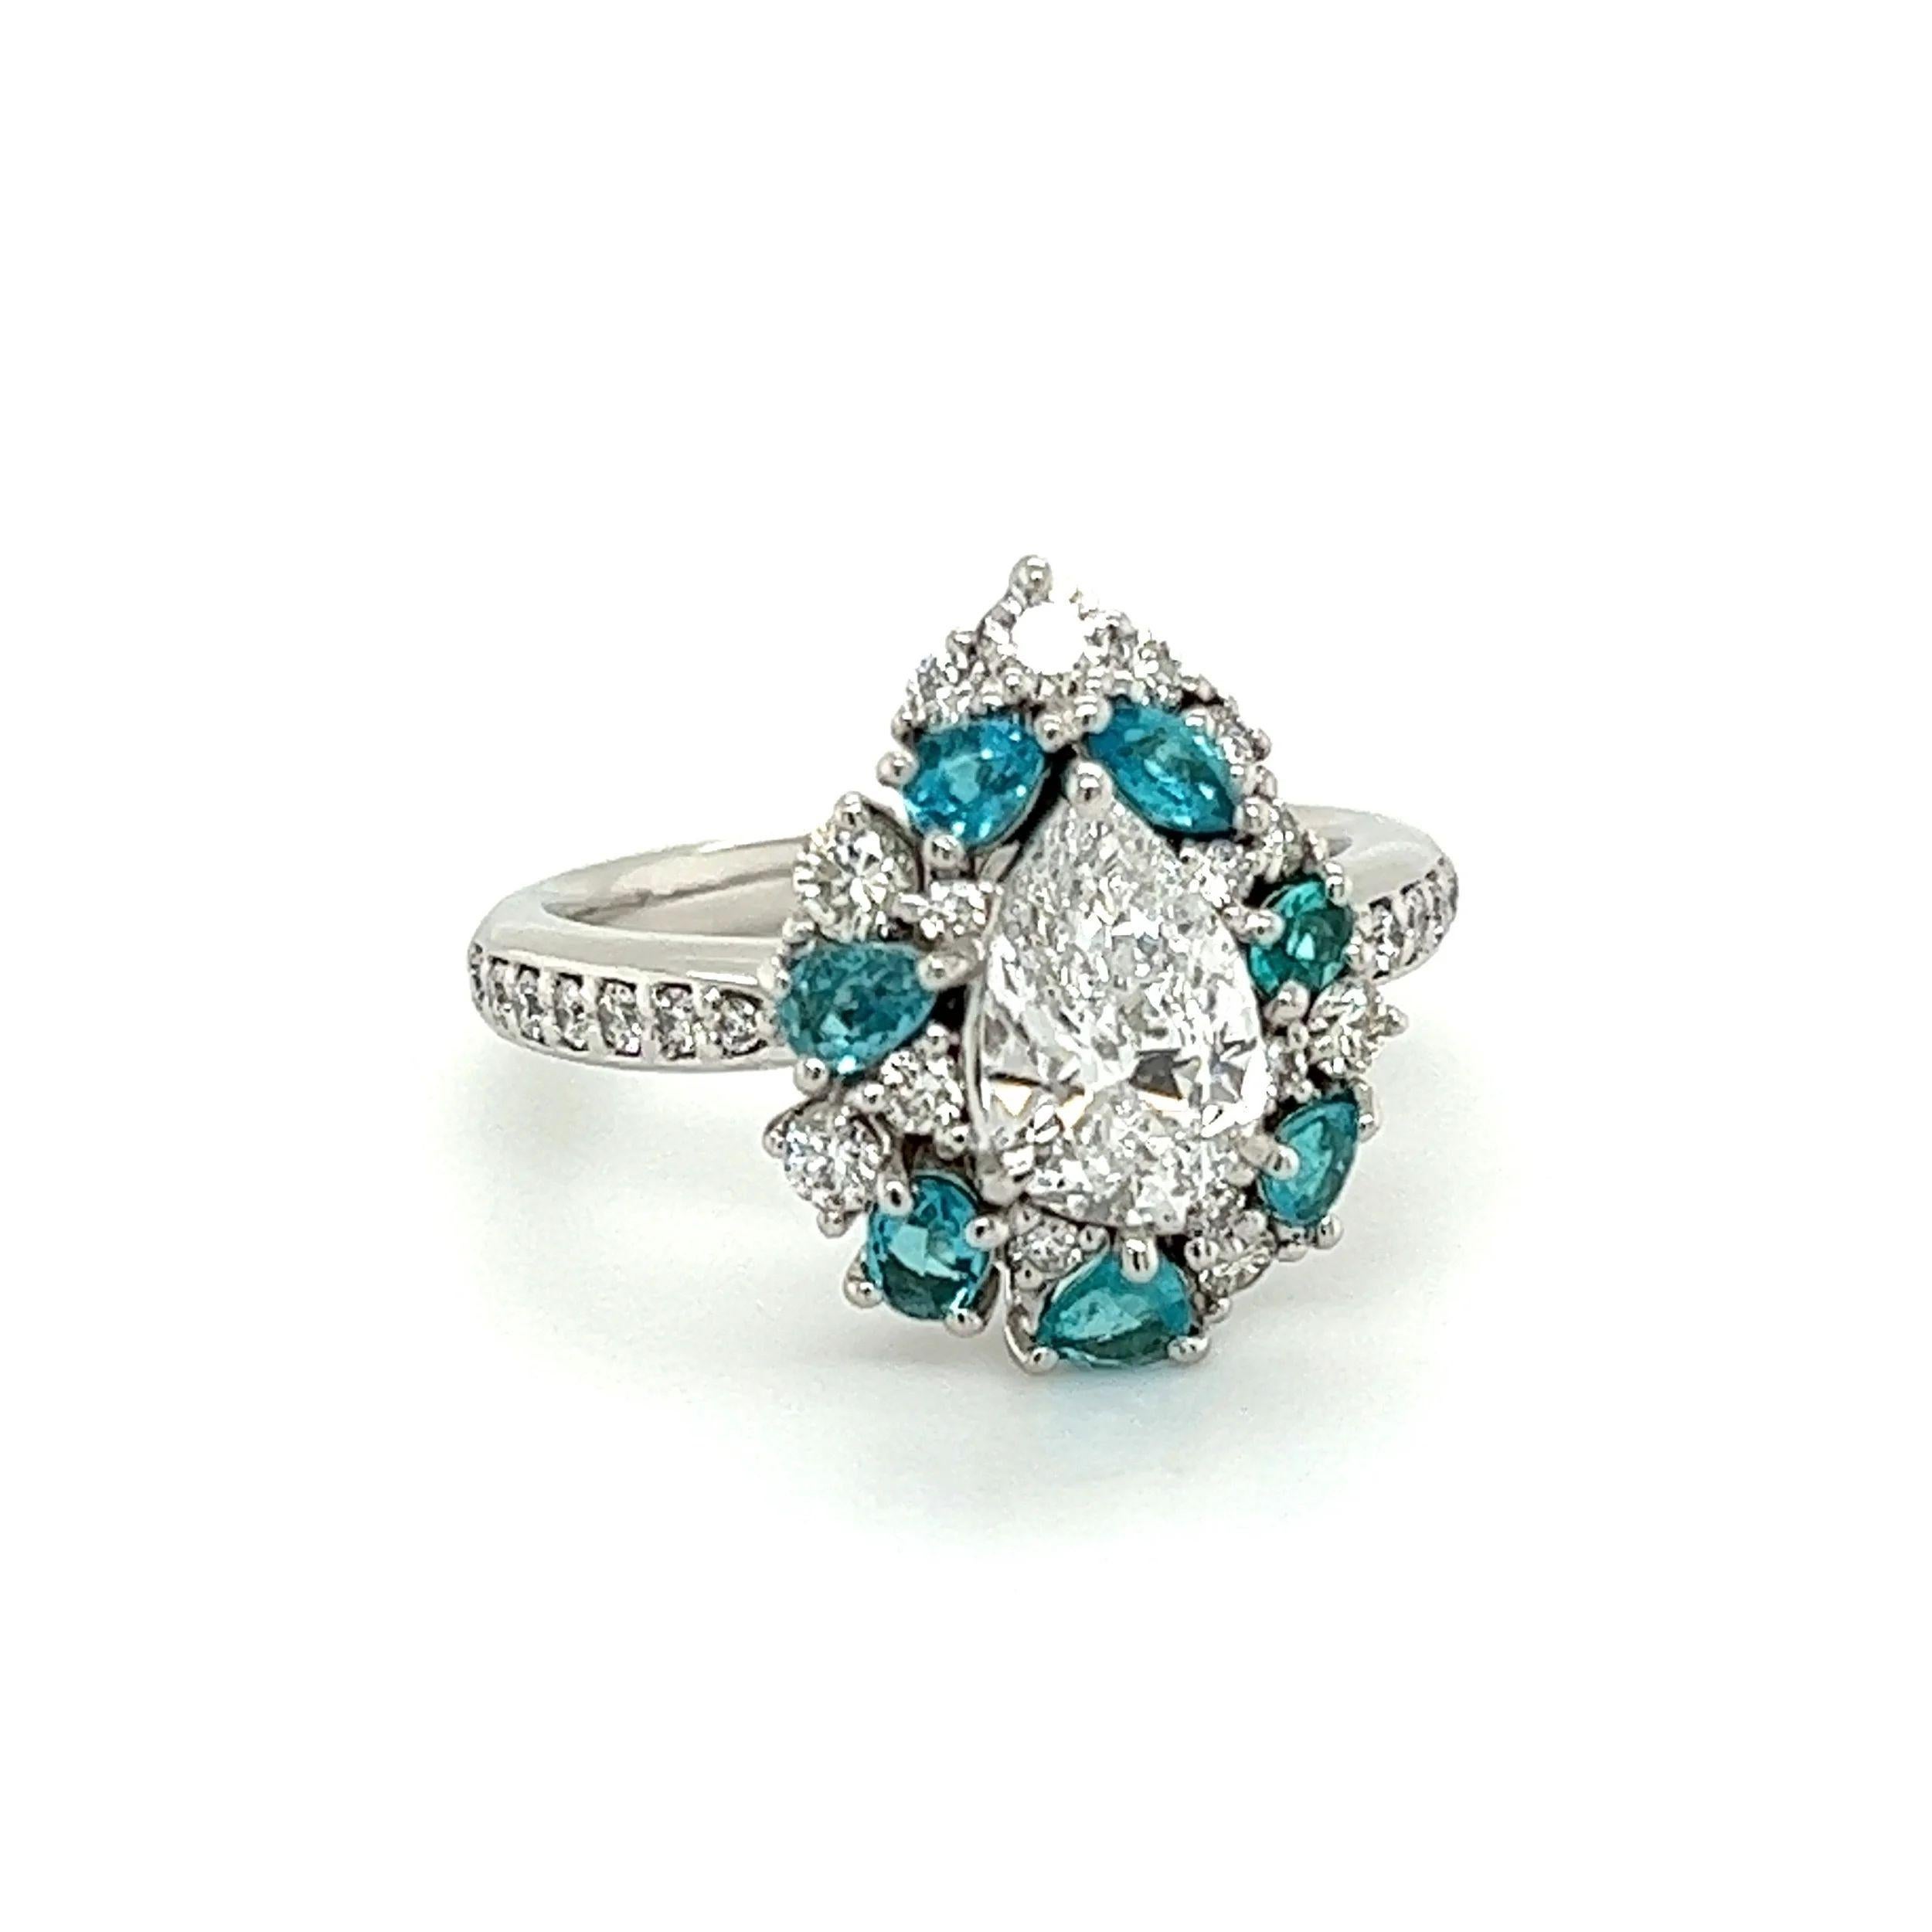 Simply Beautiful! Diamond and Paraiba Platinum Cluster Ring. Centering a securely nestled Hand set 1.02 Carat Pear shape Brilliant Diamond D-SI1 GIA. Beautifully surrounded by Paraiba weighing approx. 0.52tcw and Diamonds, approx. 0.54tcw. Hand